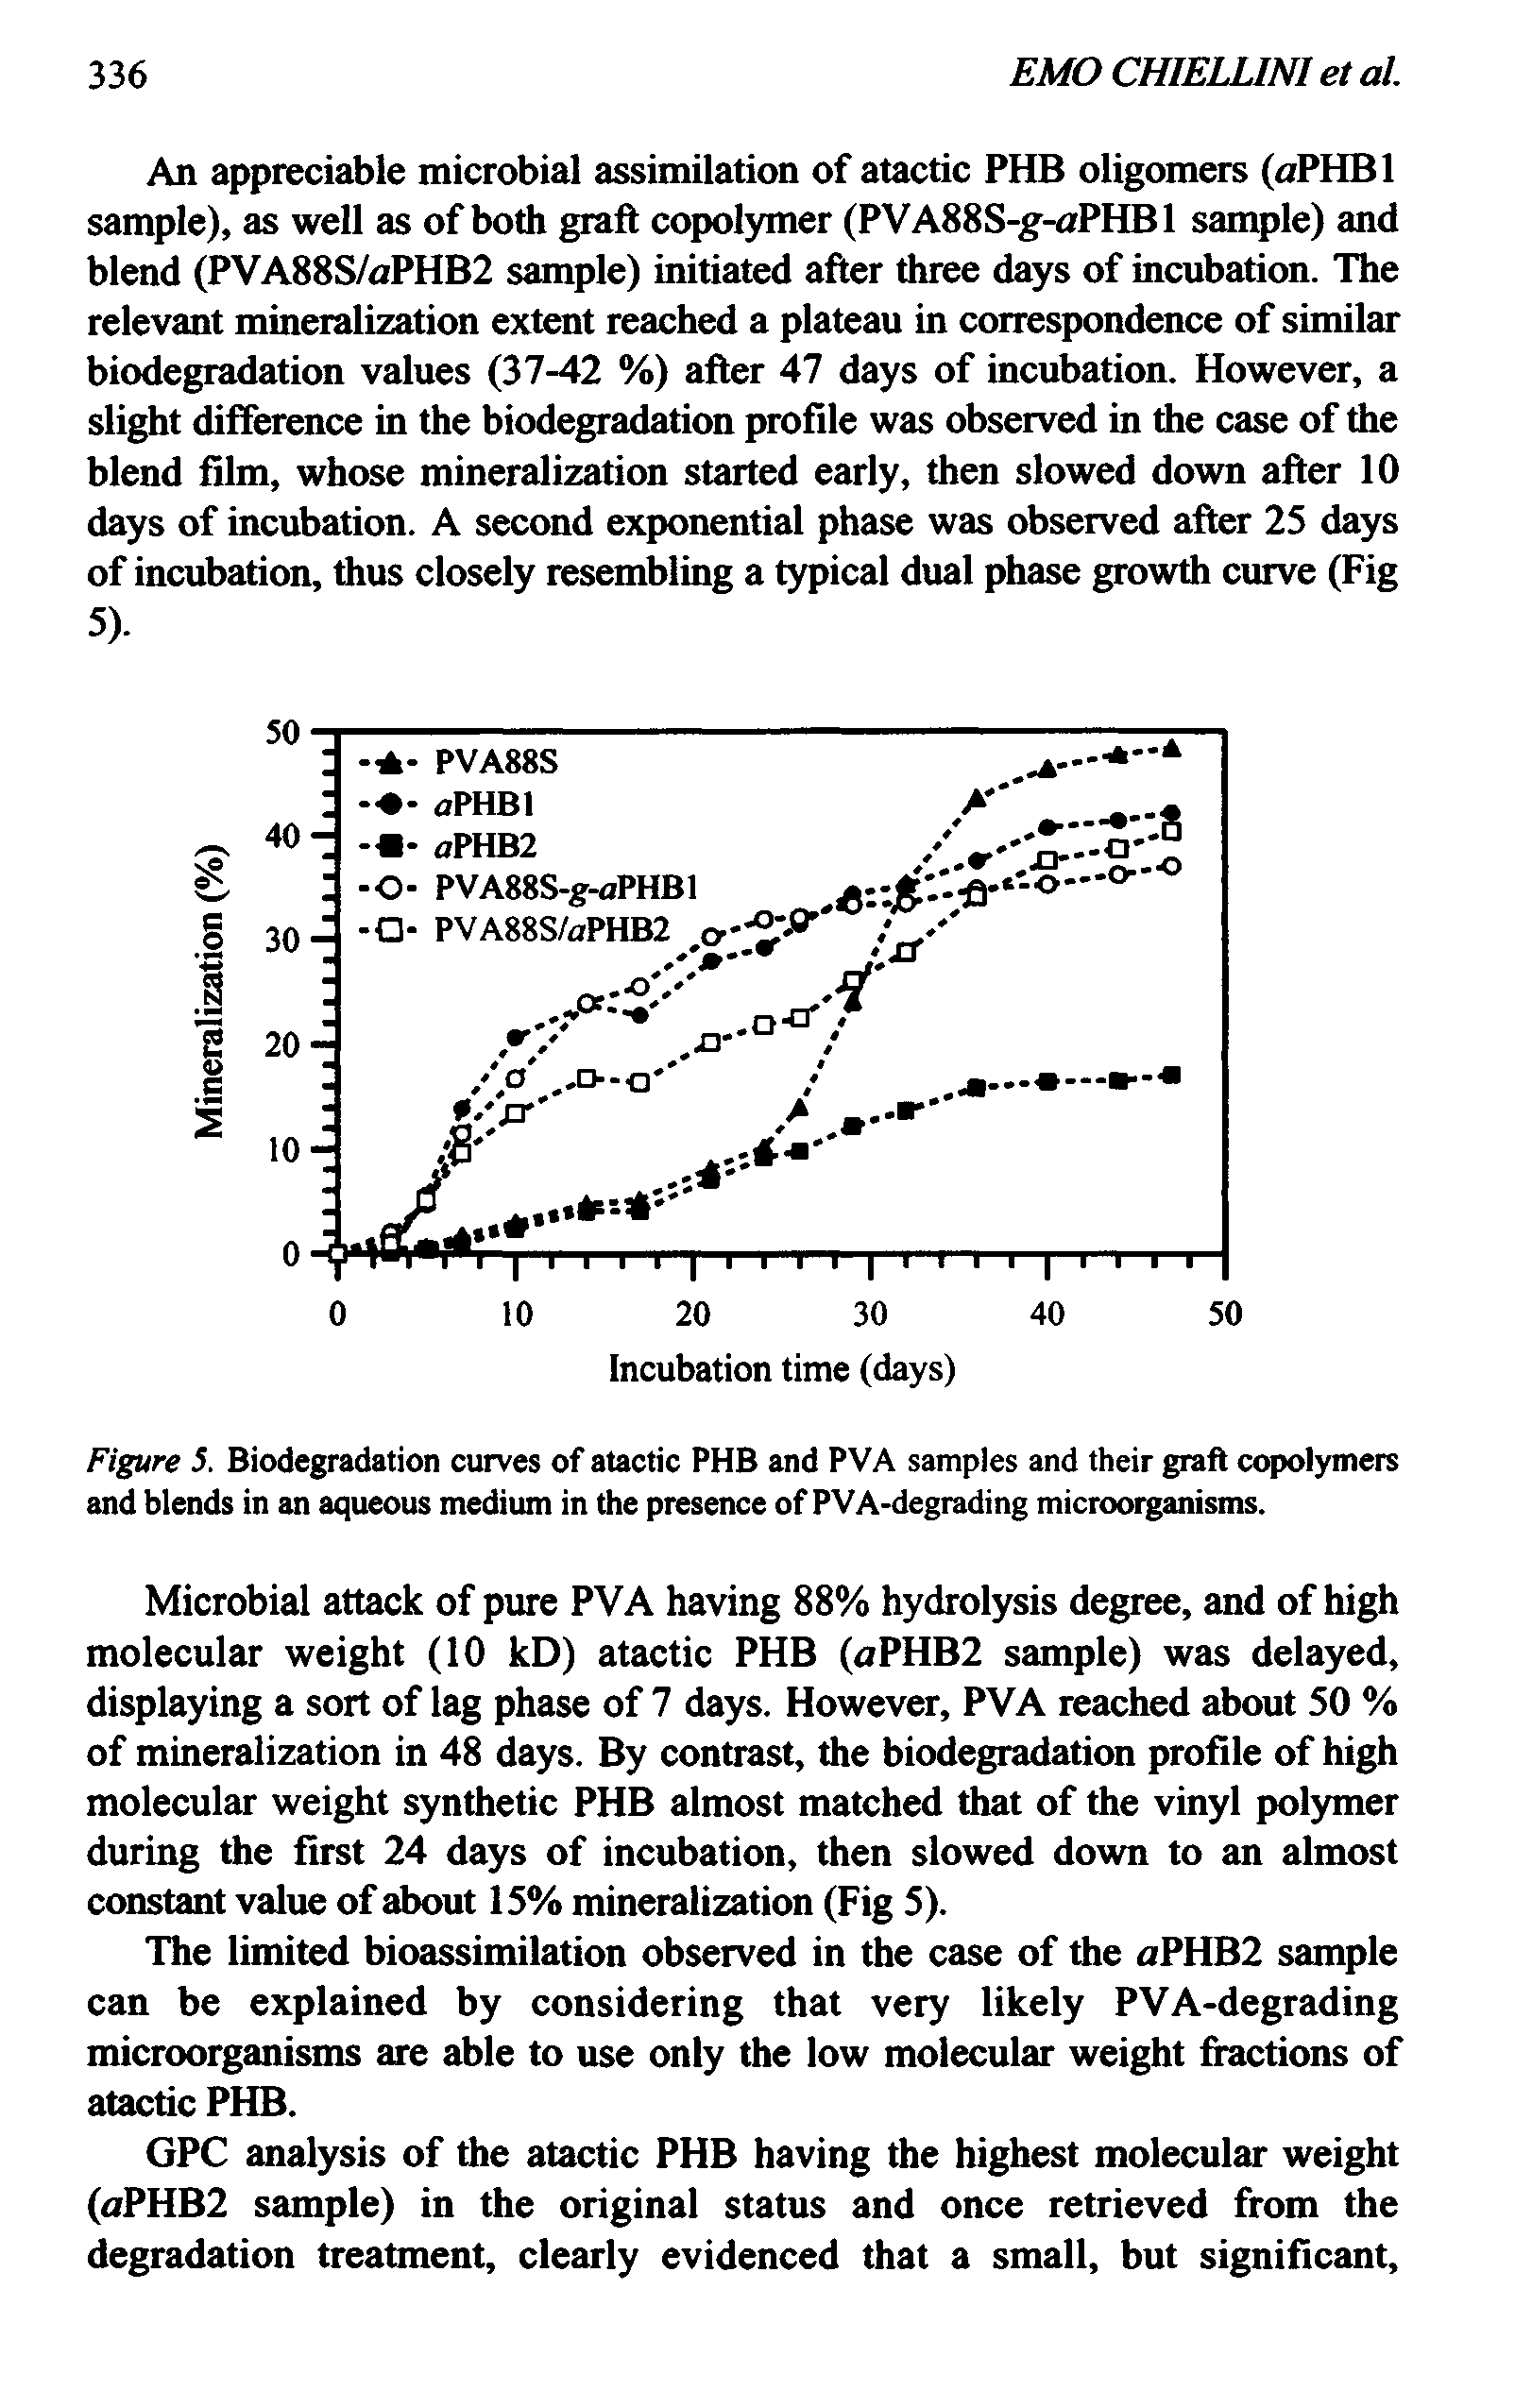 Figure 5. Biodegradation curves of atactic PHB and PVA samples and their graft copolymers and blends in an aqueous medium in the presence of PVA-degrading microorganisms.